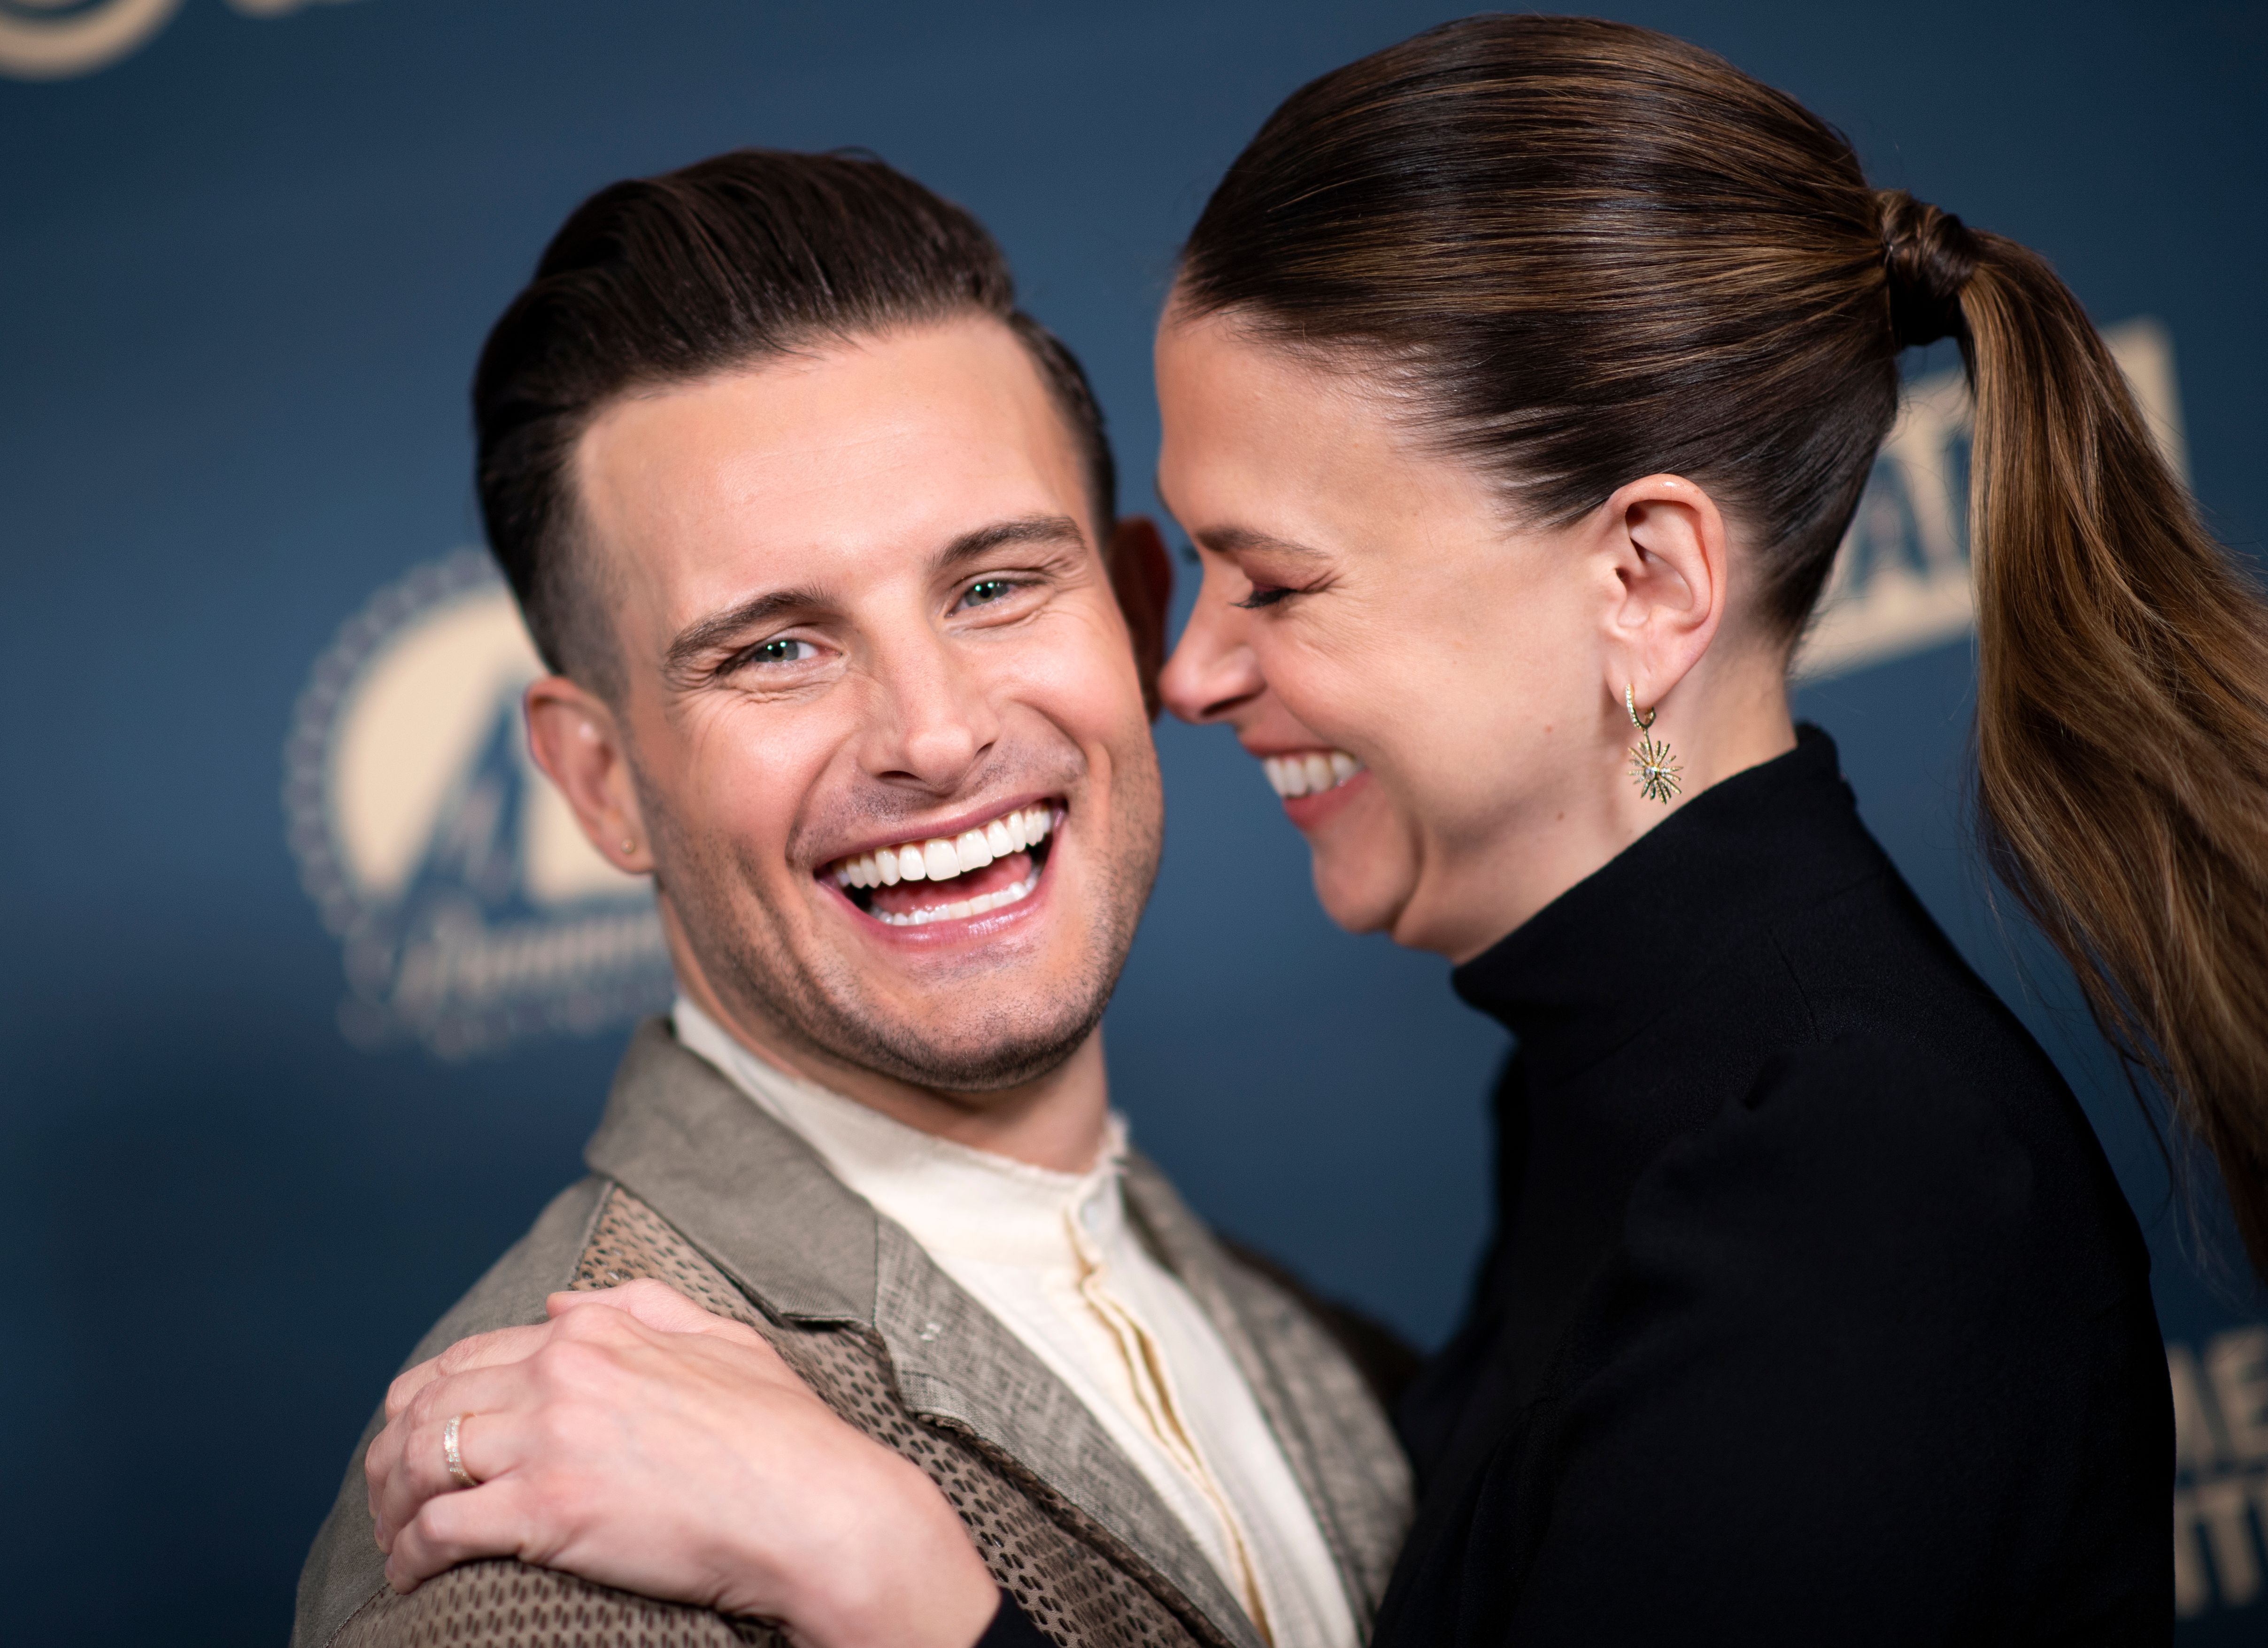 Nico Tortorella and Sutton Foster during a 'Younger' press event in 2019